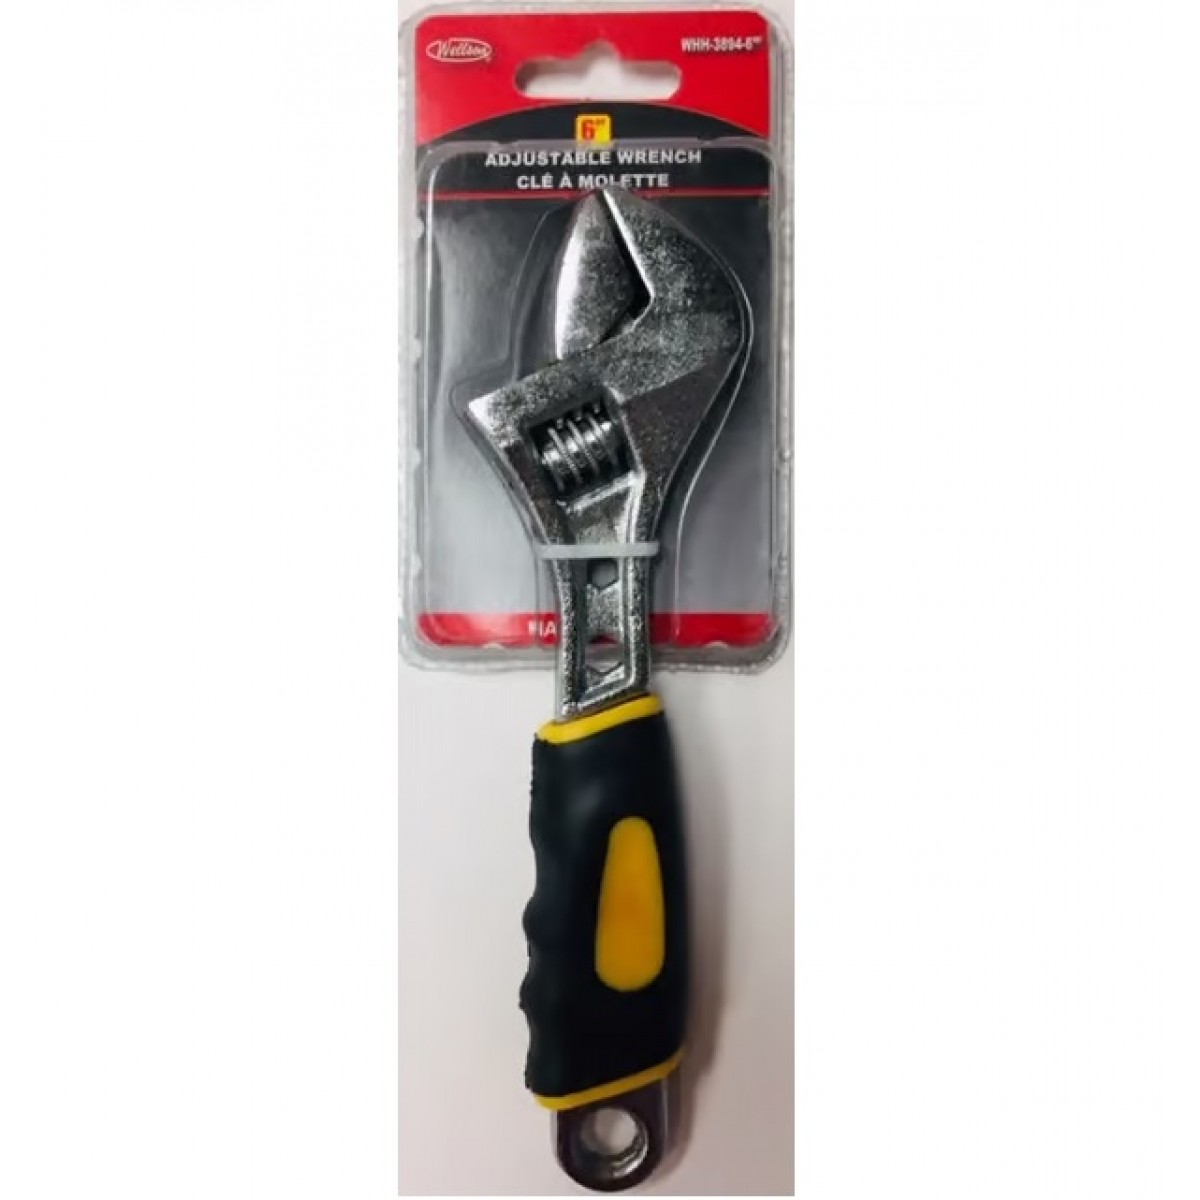 Wellson 6 in. Adjustable Wrench - WHH-3894-6